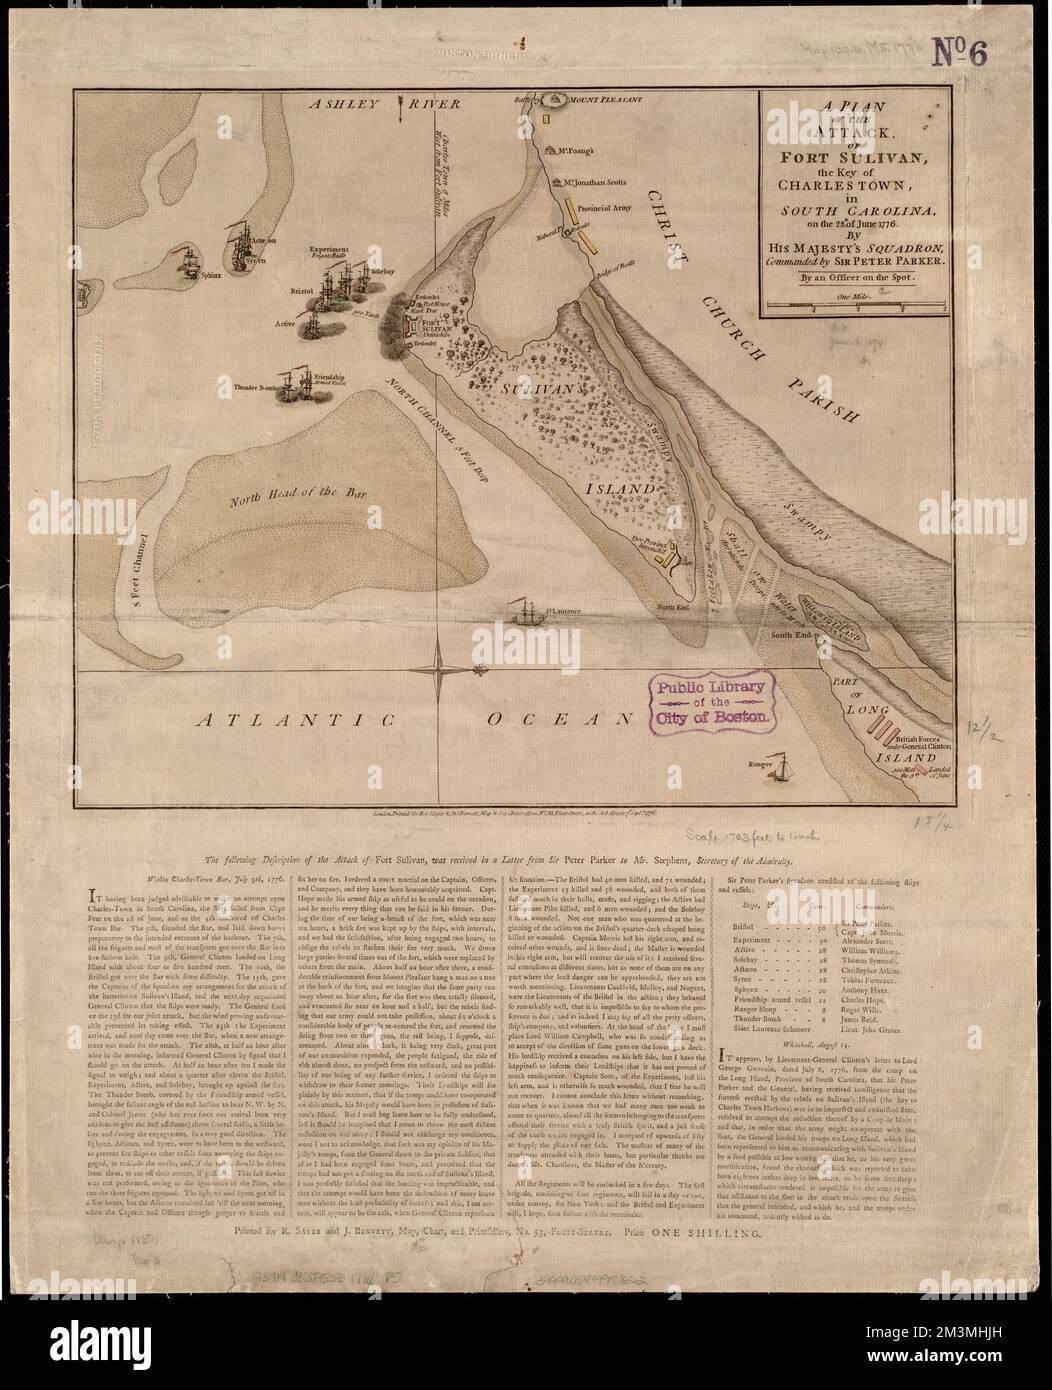 A plan of the attack of Fort Sulivan, the key of Charlestown, in South Carolina, on the 28th. of June 1776 : by His Majesty's squadron, commanded by Sir Peter Parker , Fort Moultrie, Battle of, S.C., 1776, Maps, Early works to 1800, Fortification, South Carolina, Maps, Early works to 1800, South Carolina, History, Revolution, 1775-1783, Maps, Early works to 1800 Norman B. Leventhal Map Center Collection Stock Photo